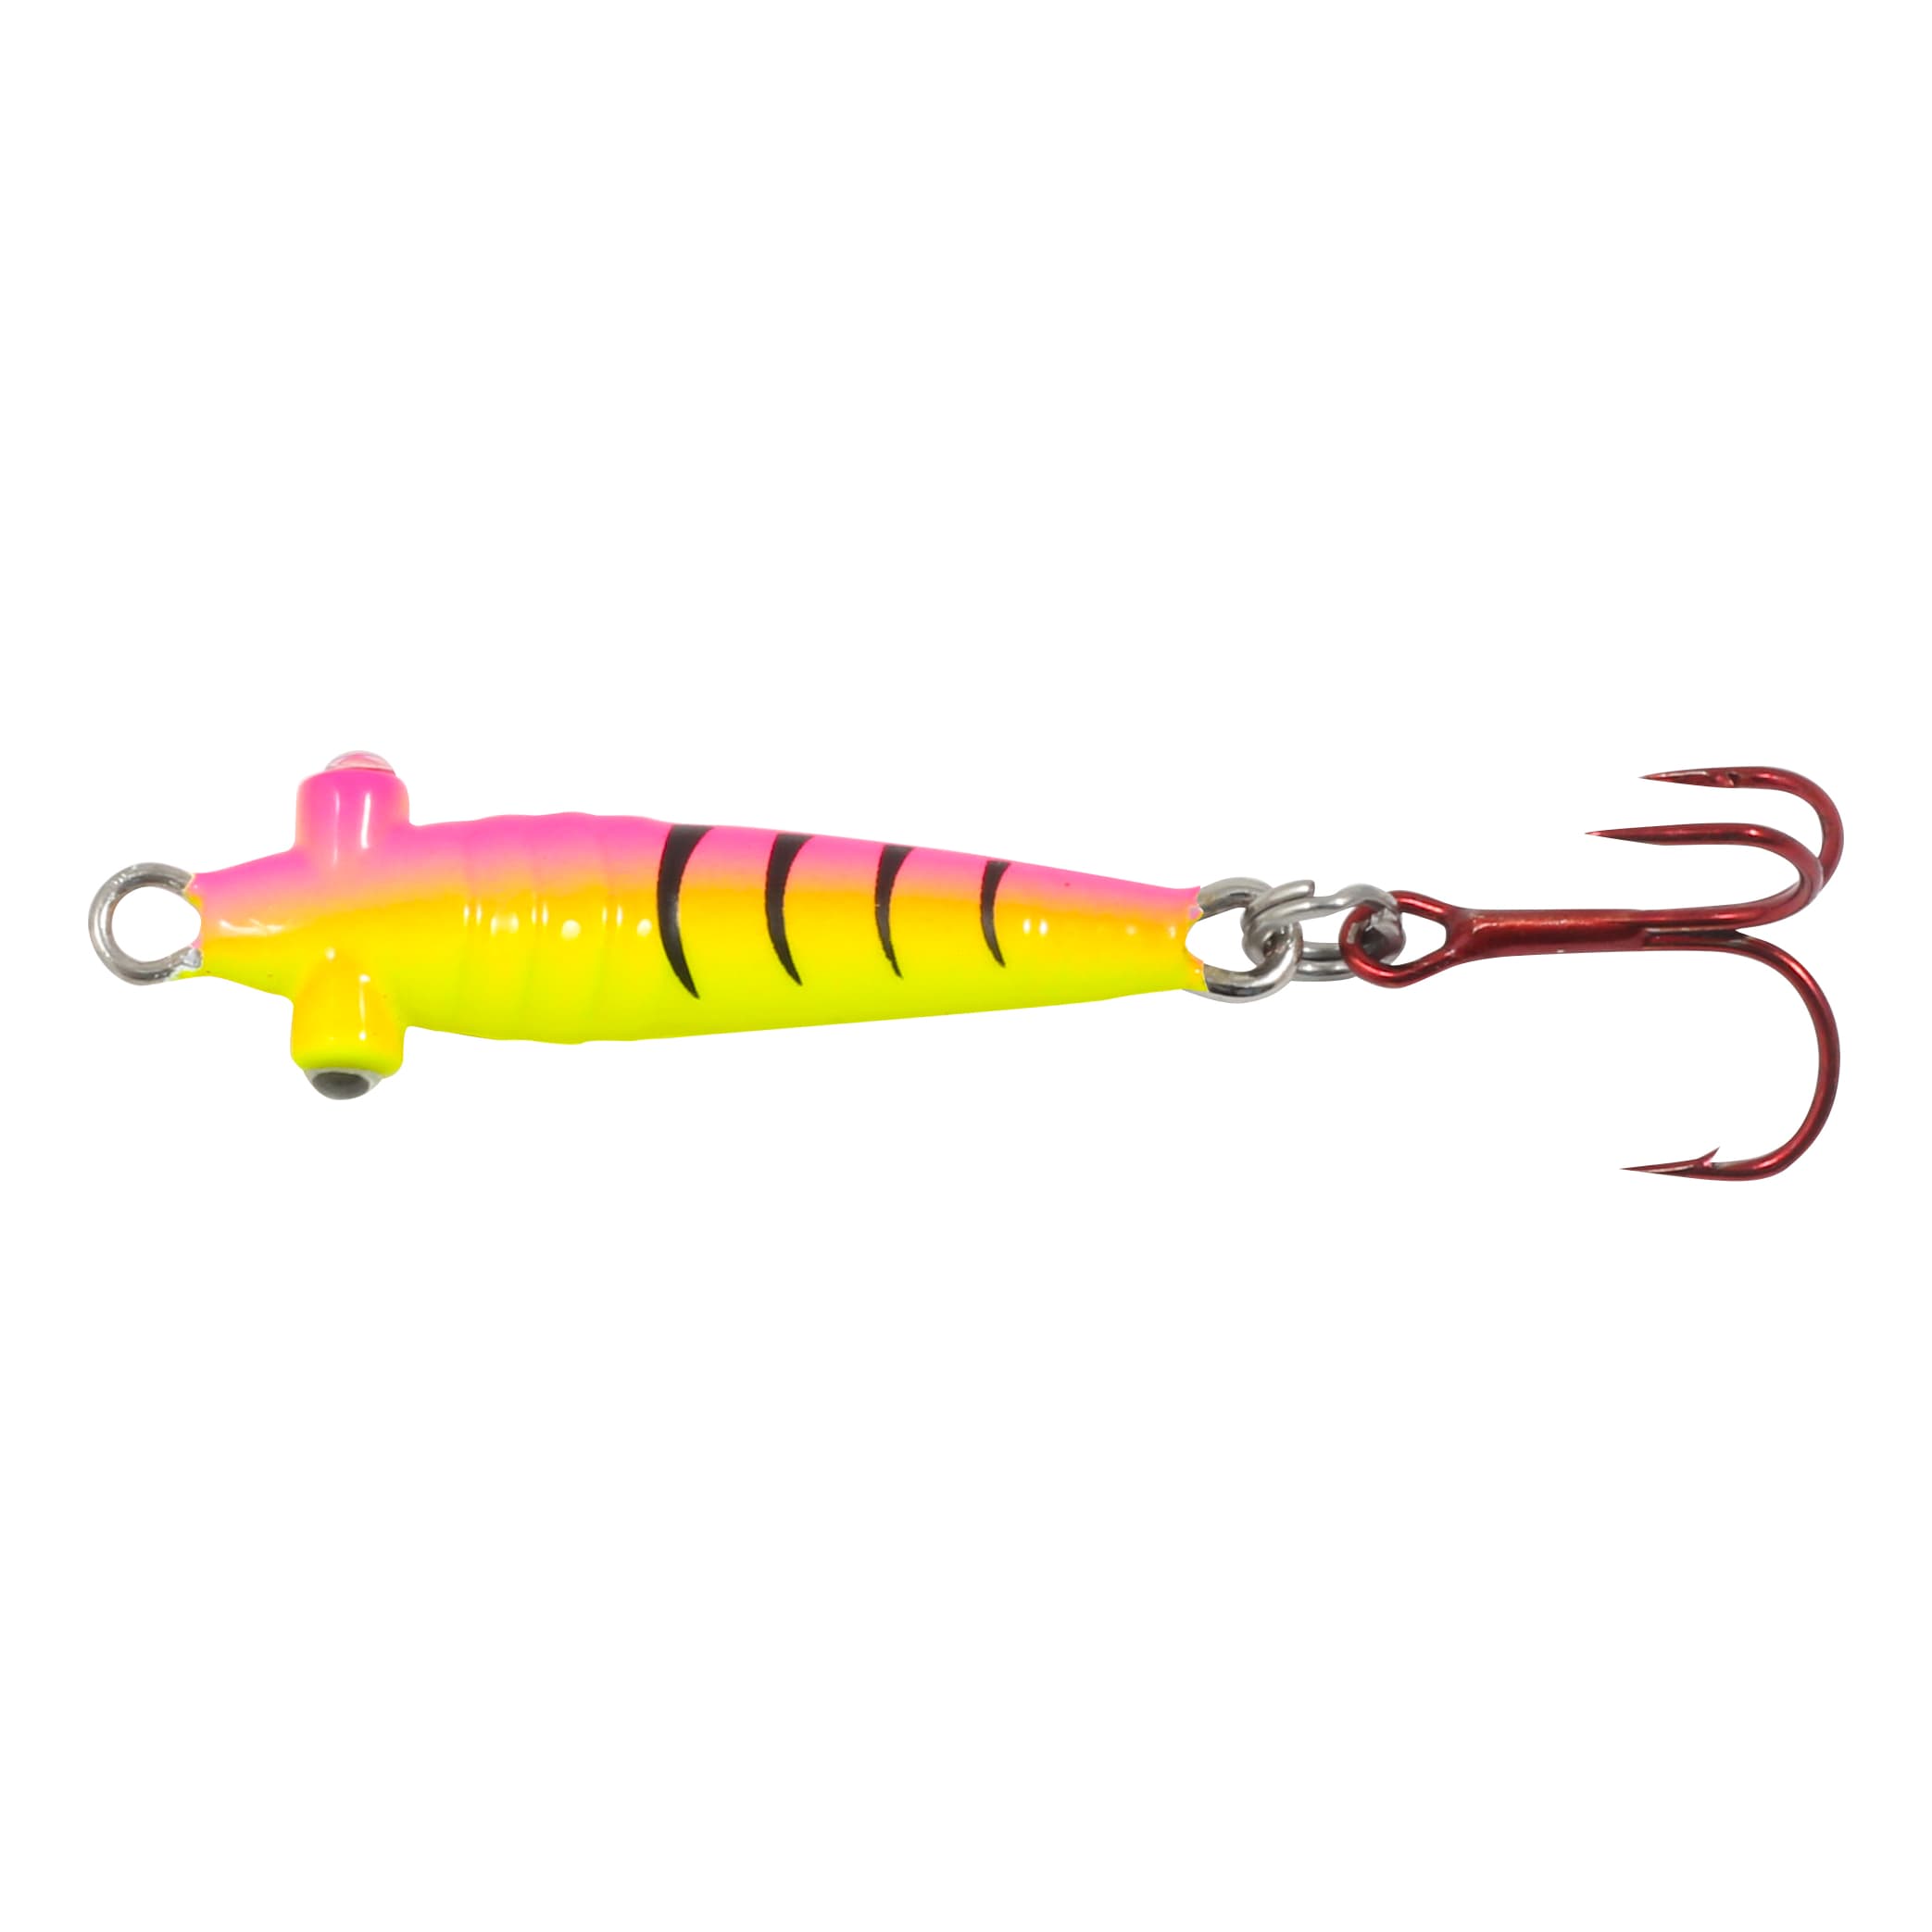 13 FISHING - Flash Bang - Jigging Rattle Spoon - Golden Shiner - 3/8th oz -  1 Bait with 3 Glow Sticks - FB-GS38, Spoons -  Canada